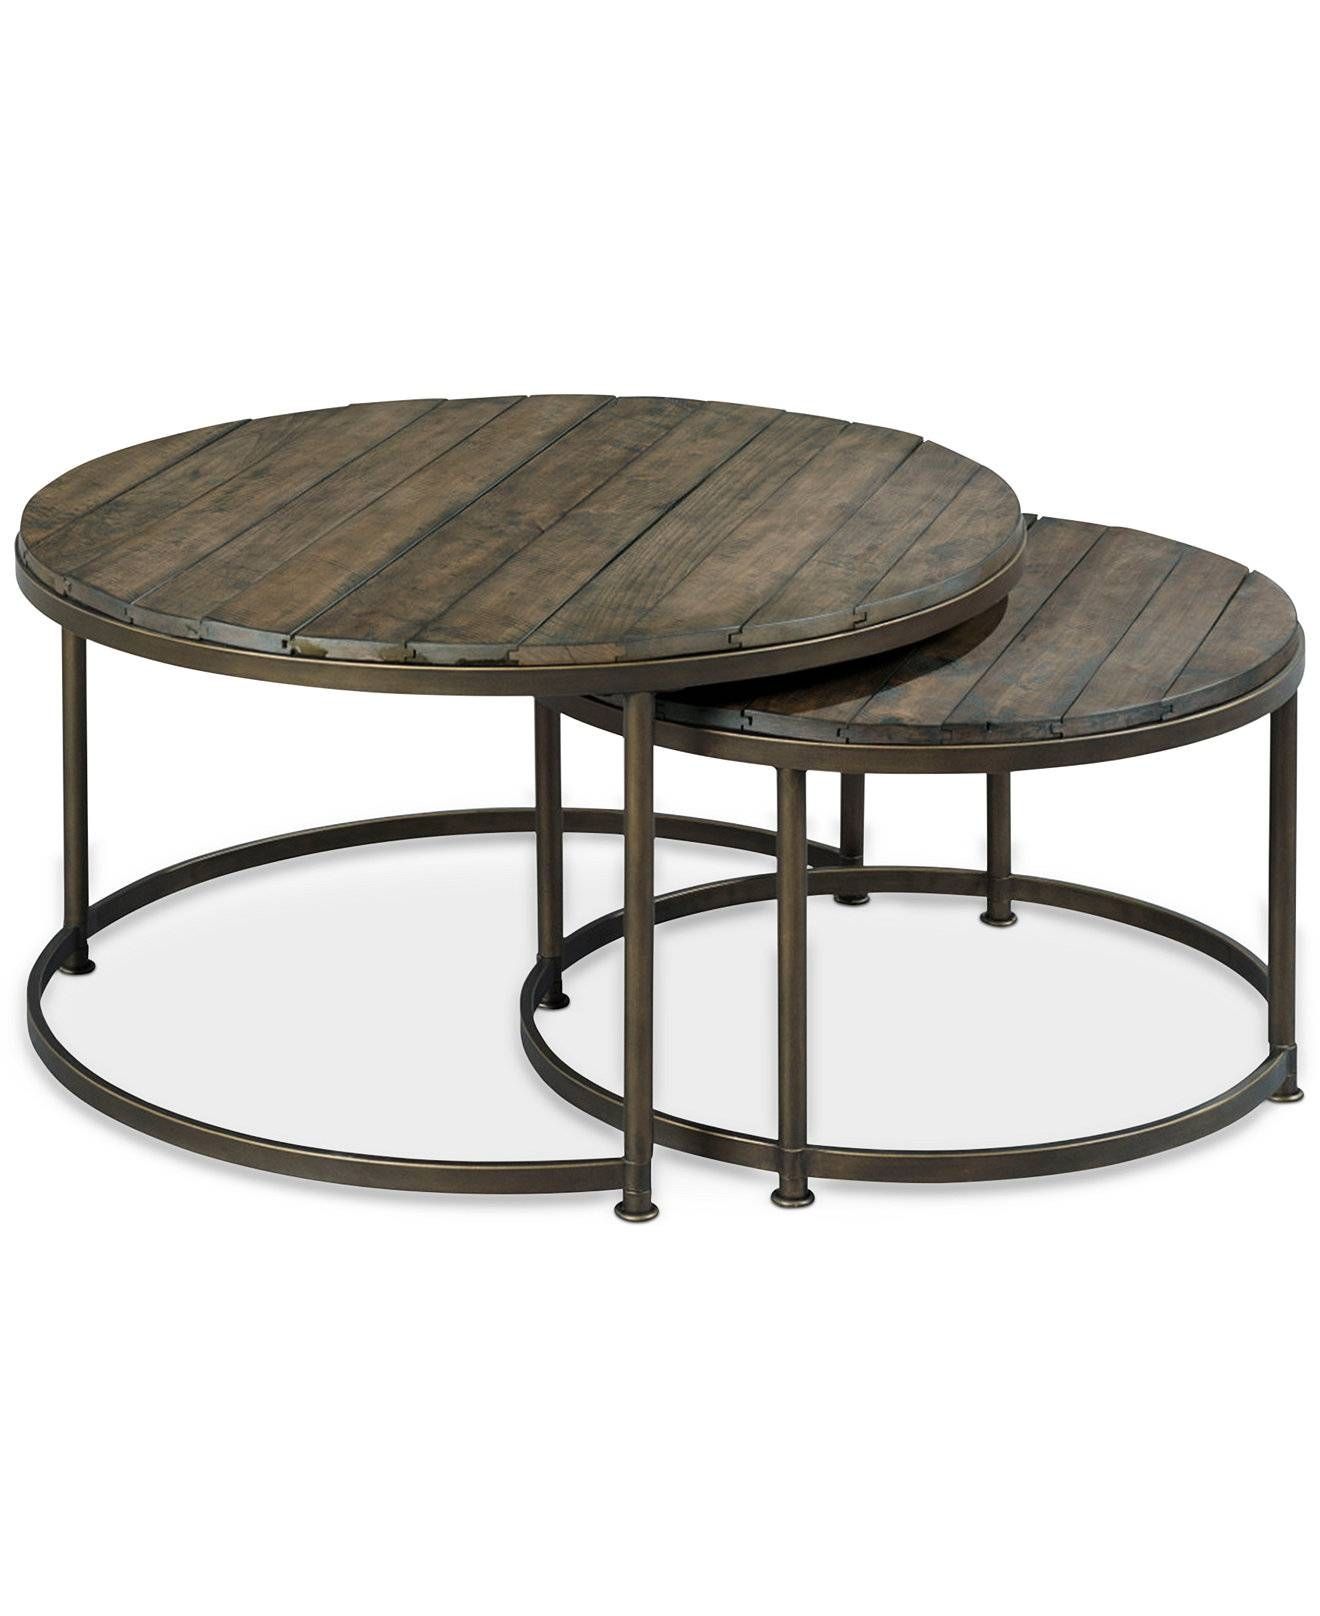 Coffee Table: Amazing Circle Coffee Table Ideas Round Black Coffee Intended For Dark Wood Round Coffee Tables (View 21 of 30)